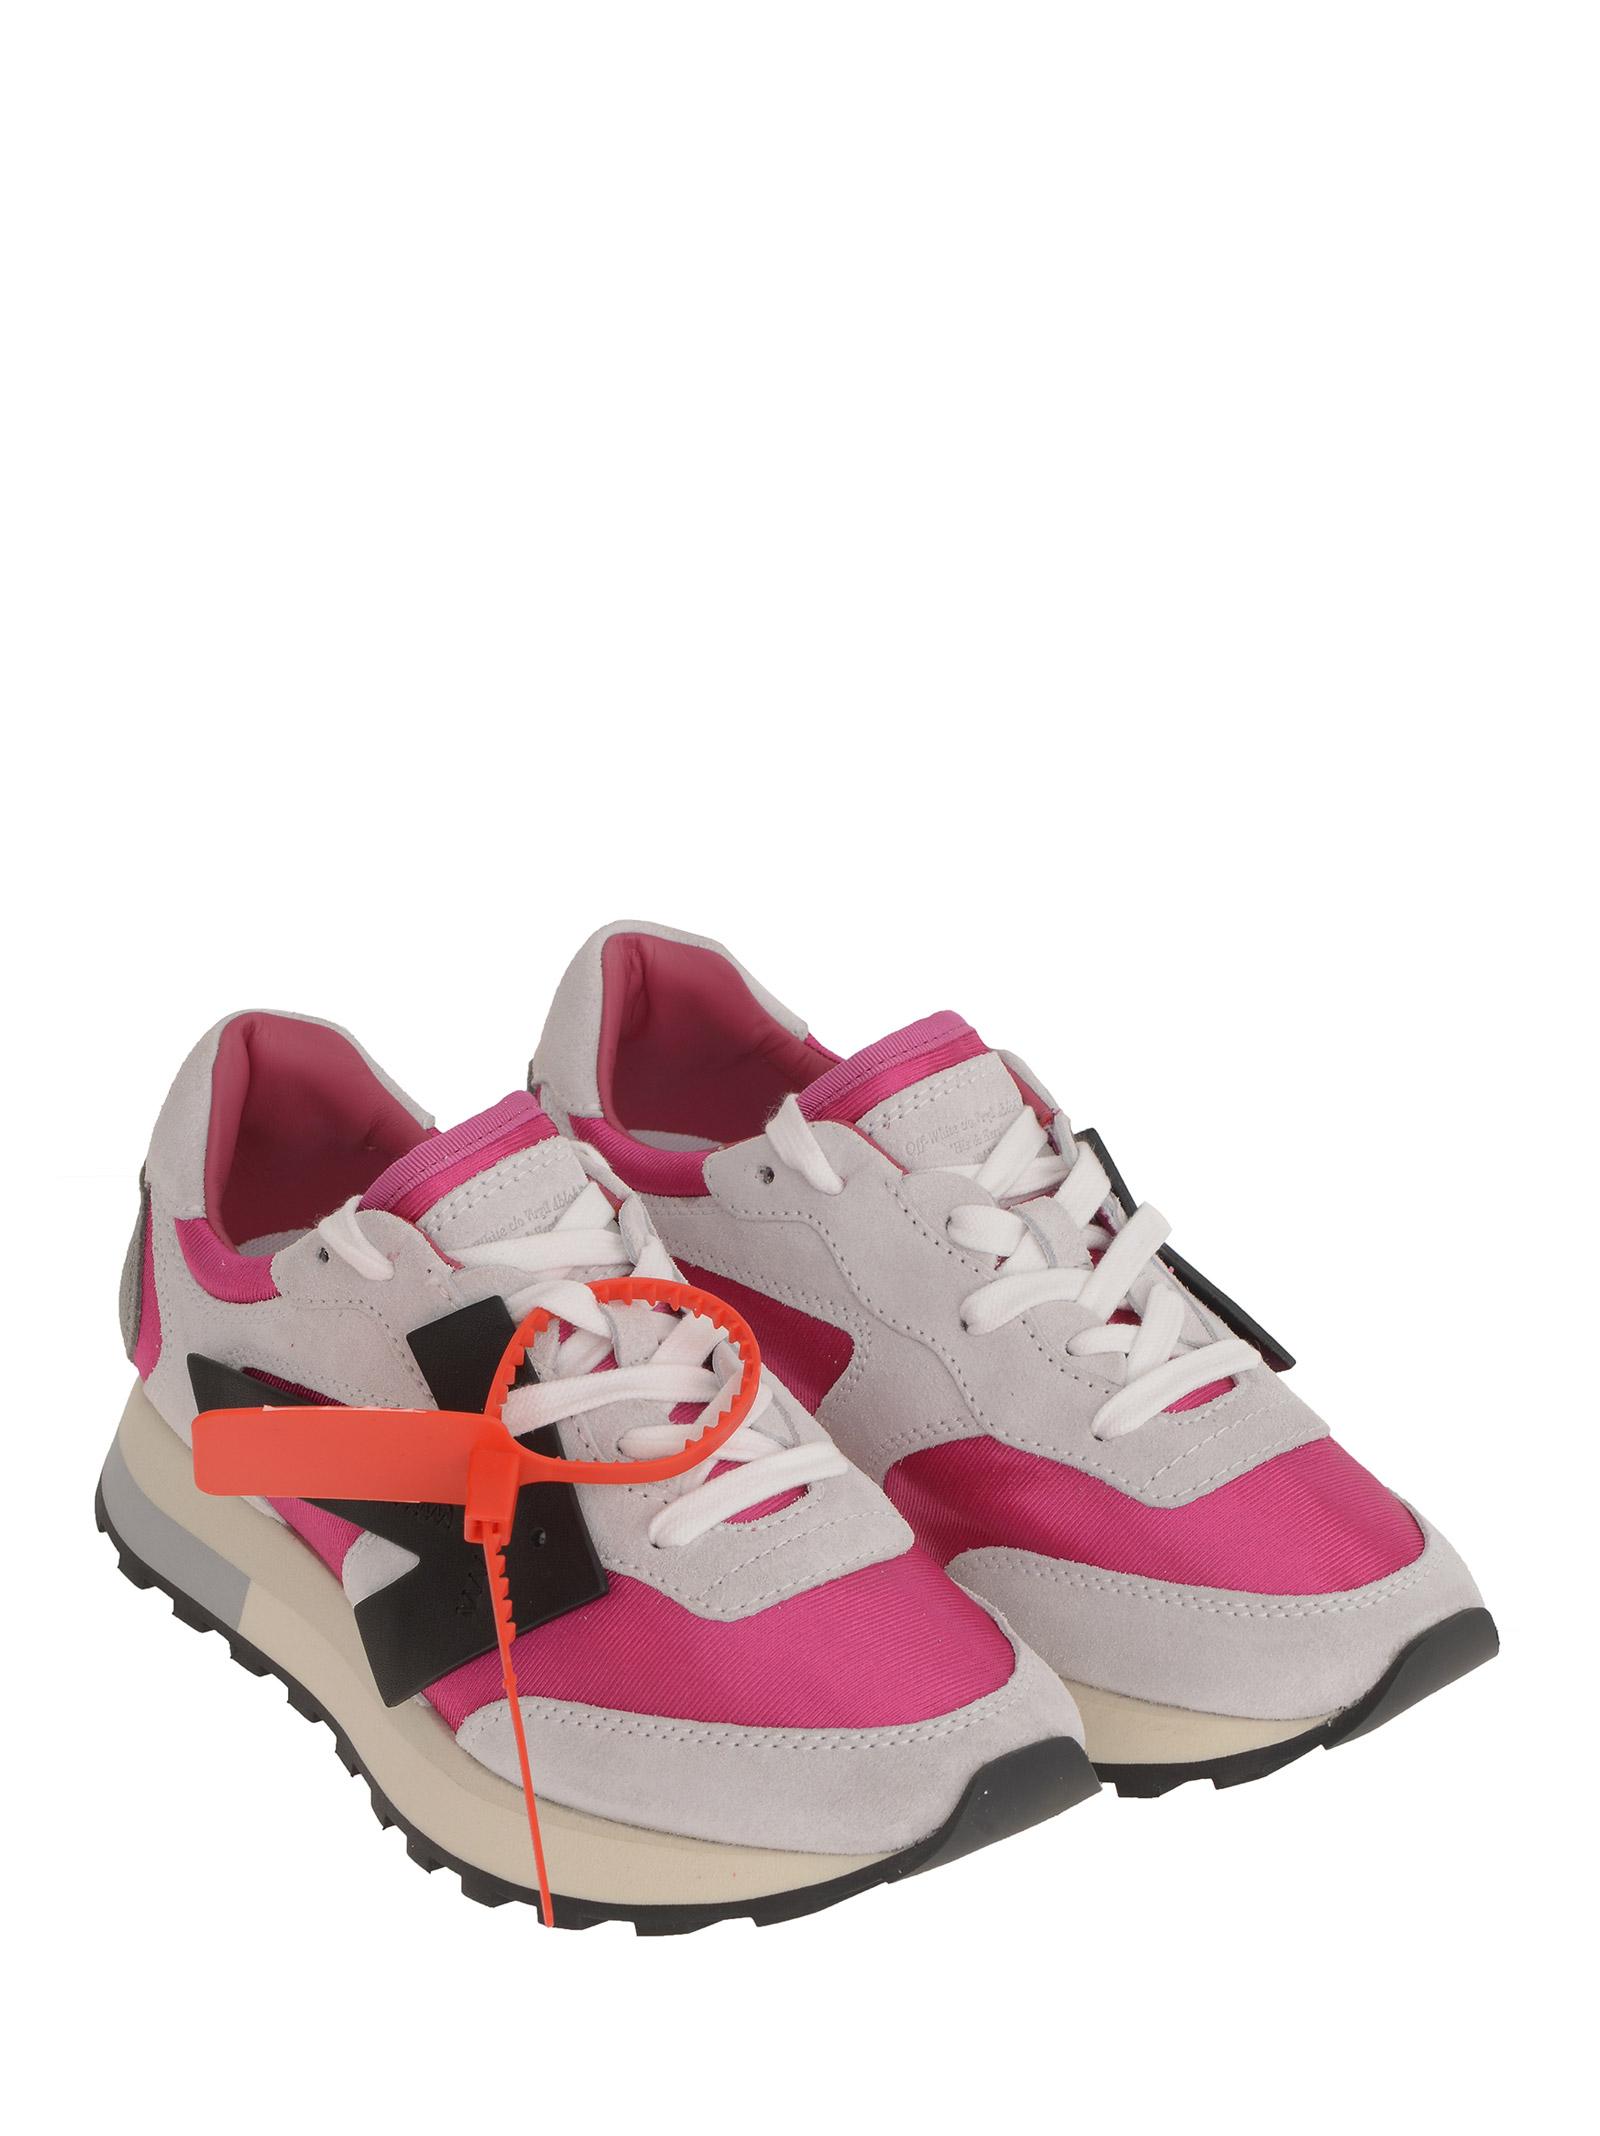 Off-White c/o Virgil Abloh Fuchsia Hg Runner Sneakers In Suede And Mesh ...